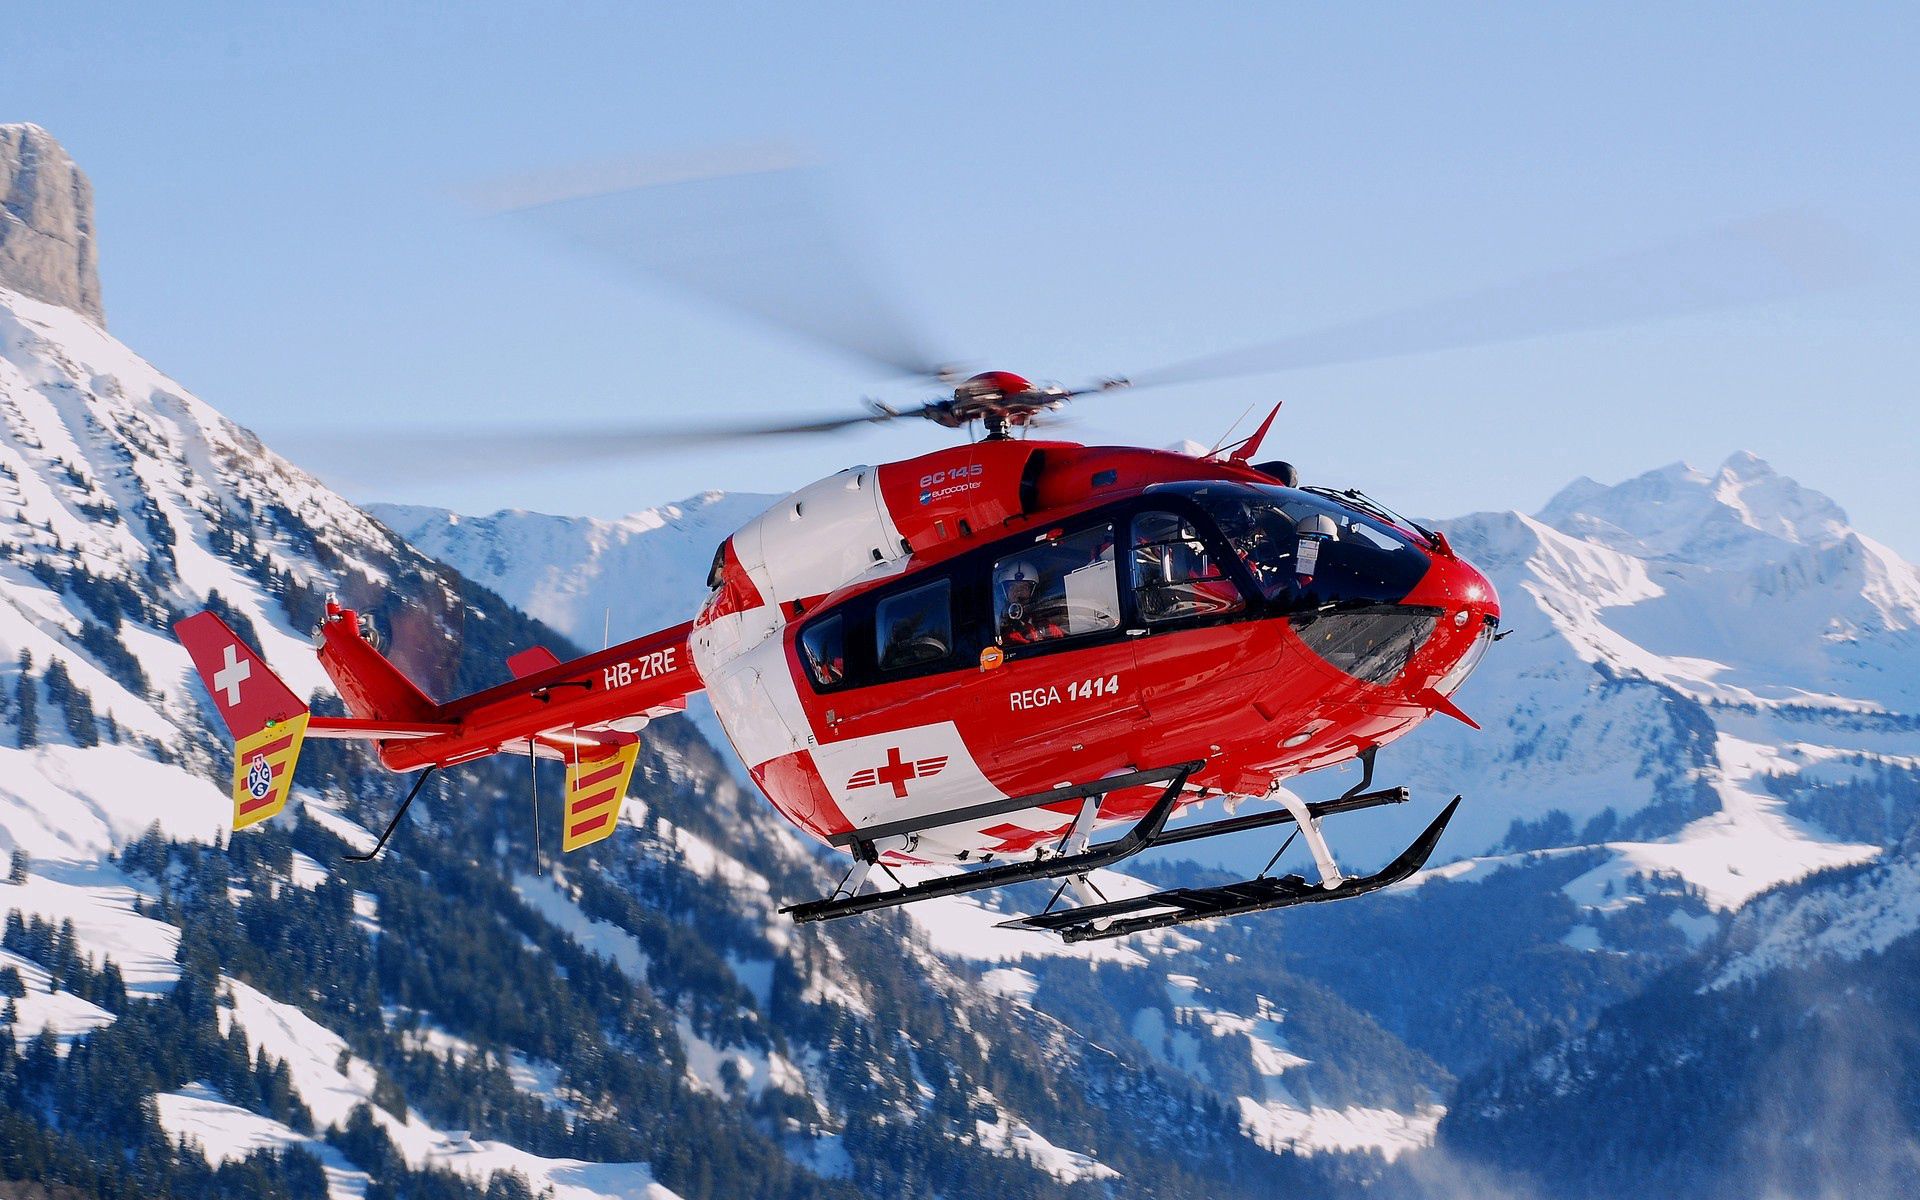 rescue helicopter, sky, helicopter, mountains, miscellanea, miscellaneous, flight